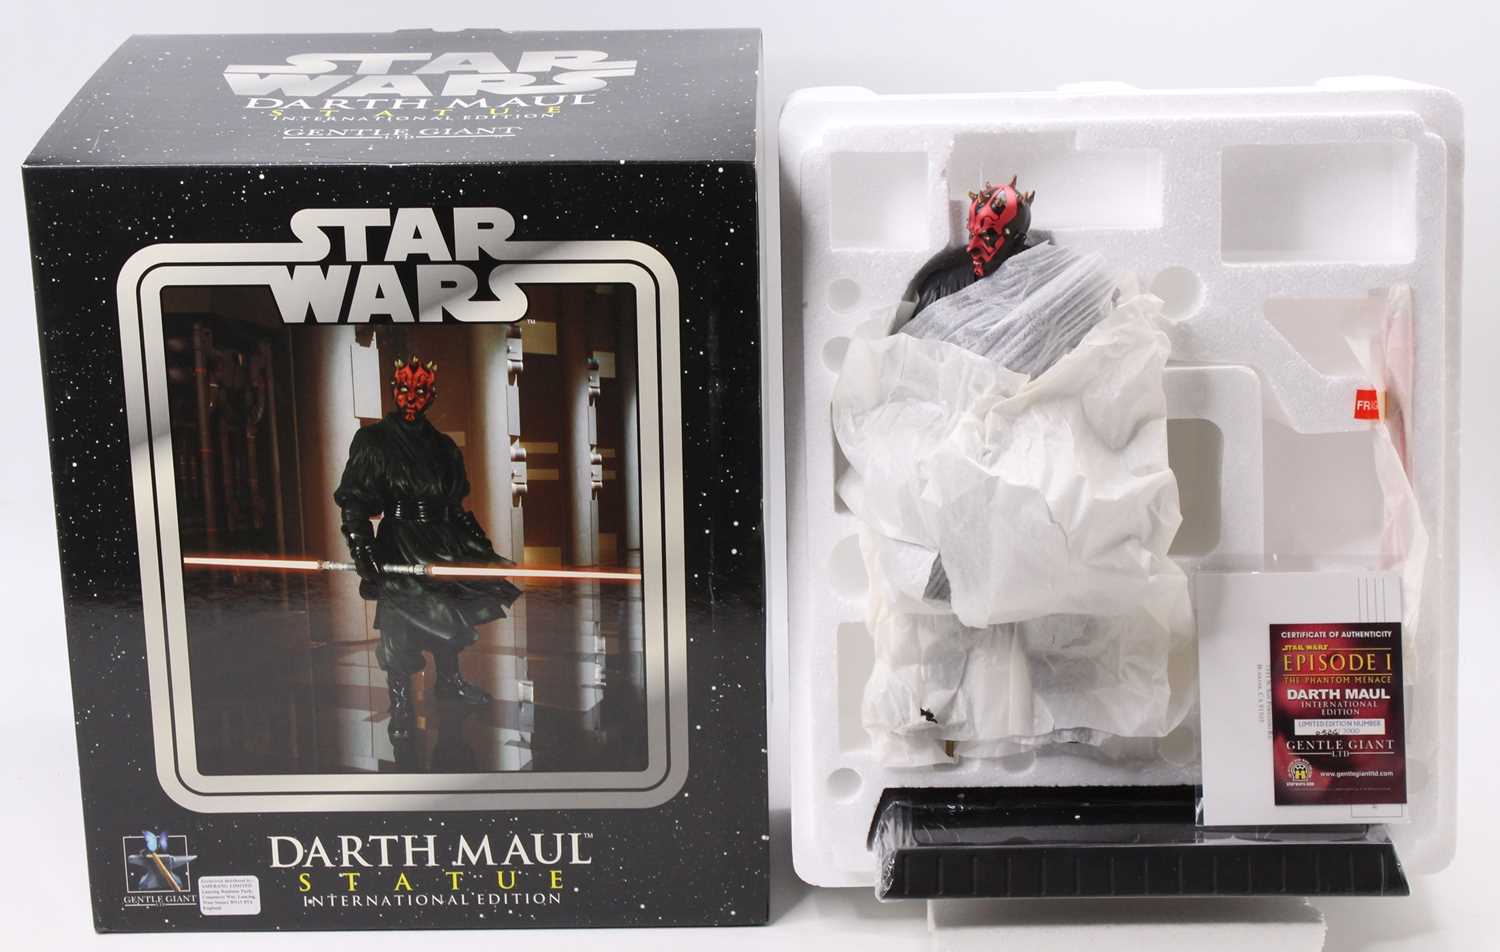 A Gentle Giant Ltd No. 5637-1 International Edition 1/6 scale collectable Star Wars Darth Maul